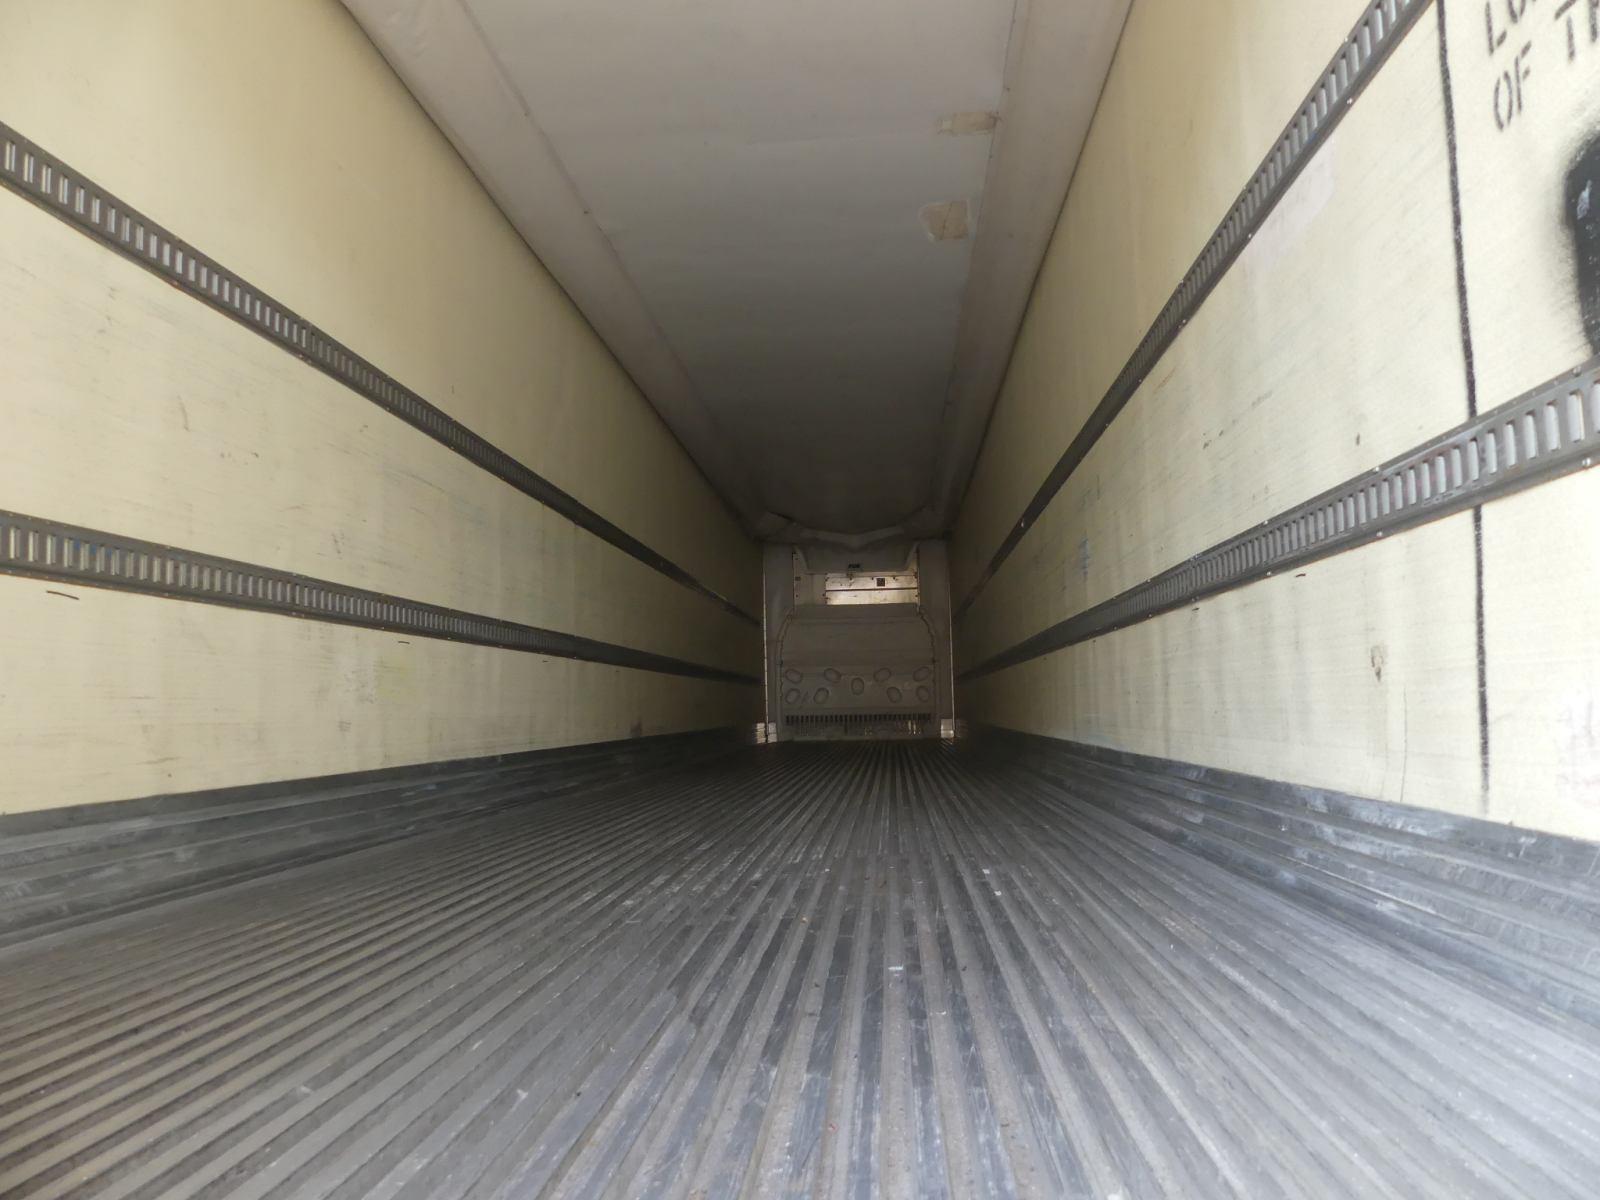 2012 Utility 53' Reefer Trailer, s/n 1UYVS2537CU276608: T/A, ThermoKing Uni